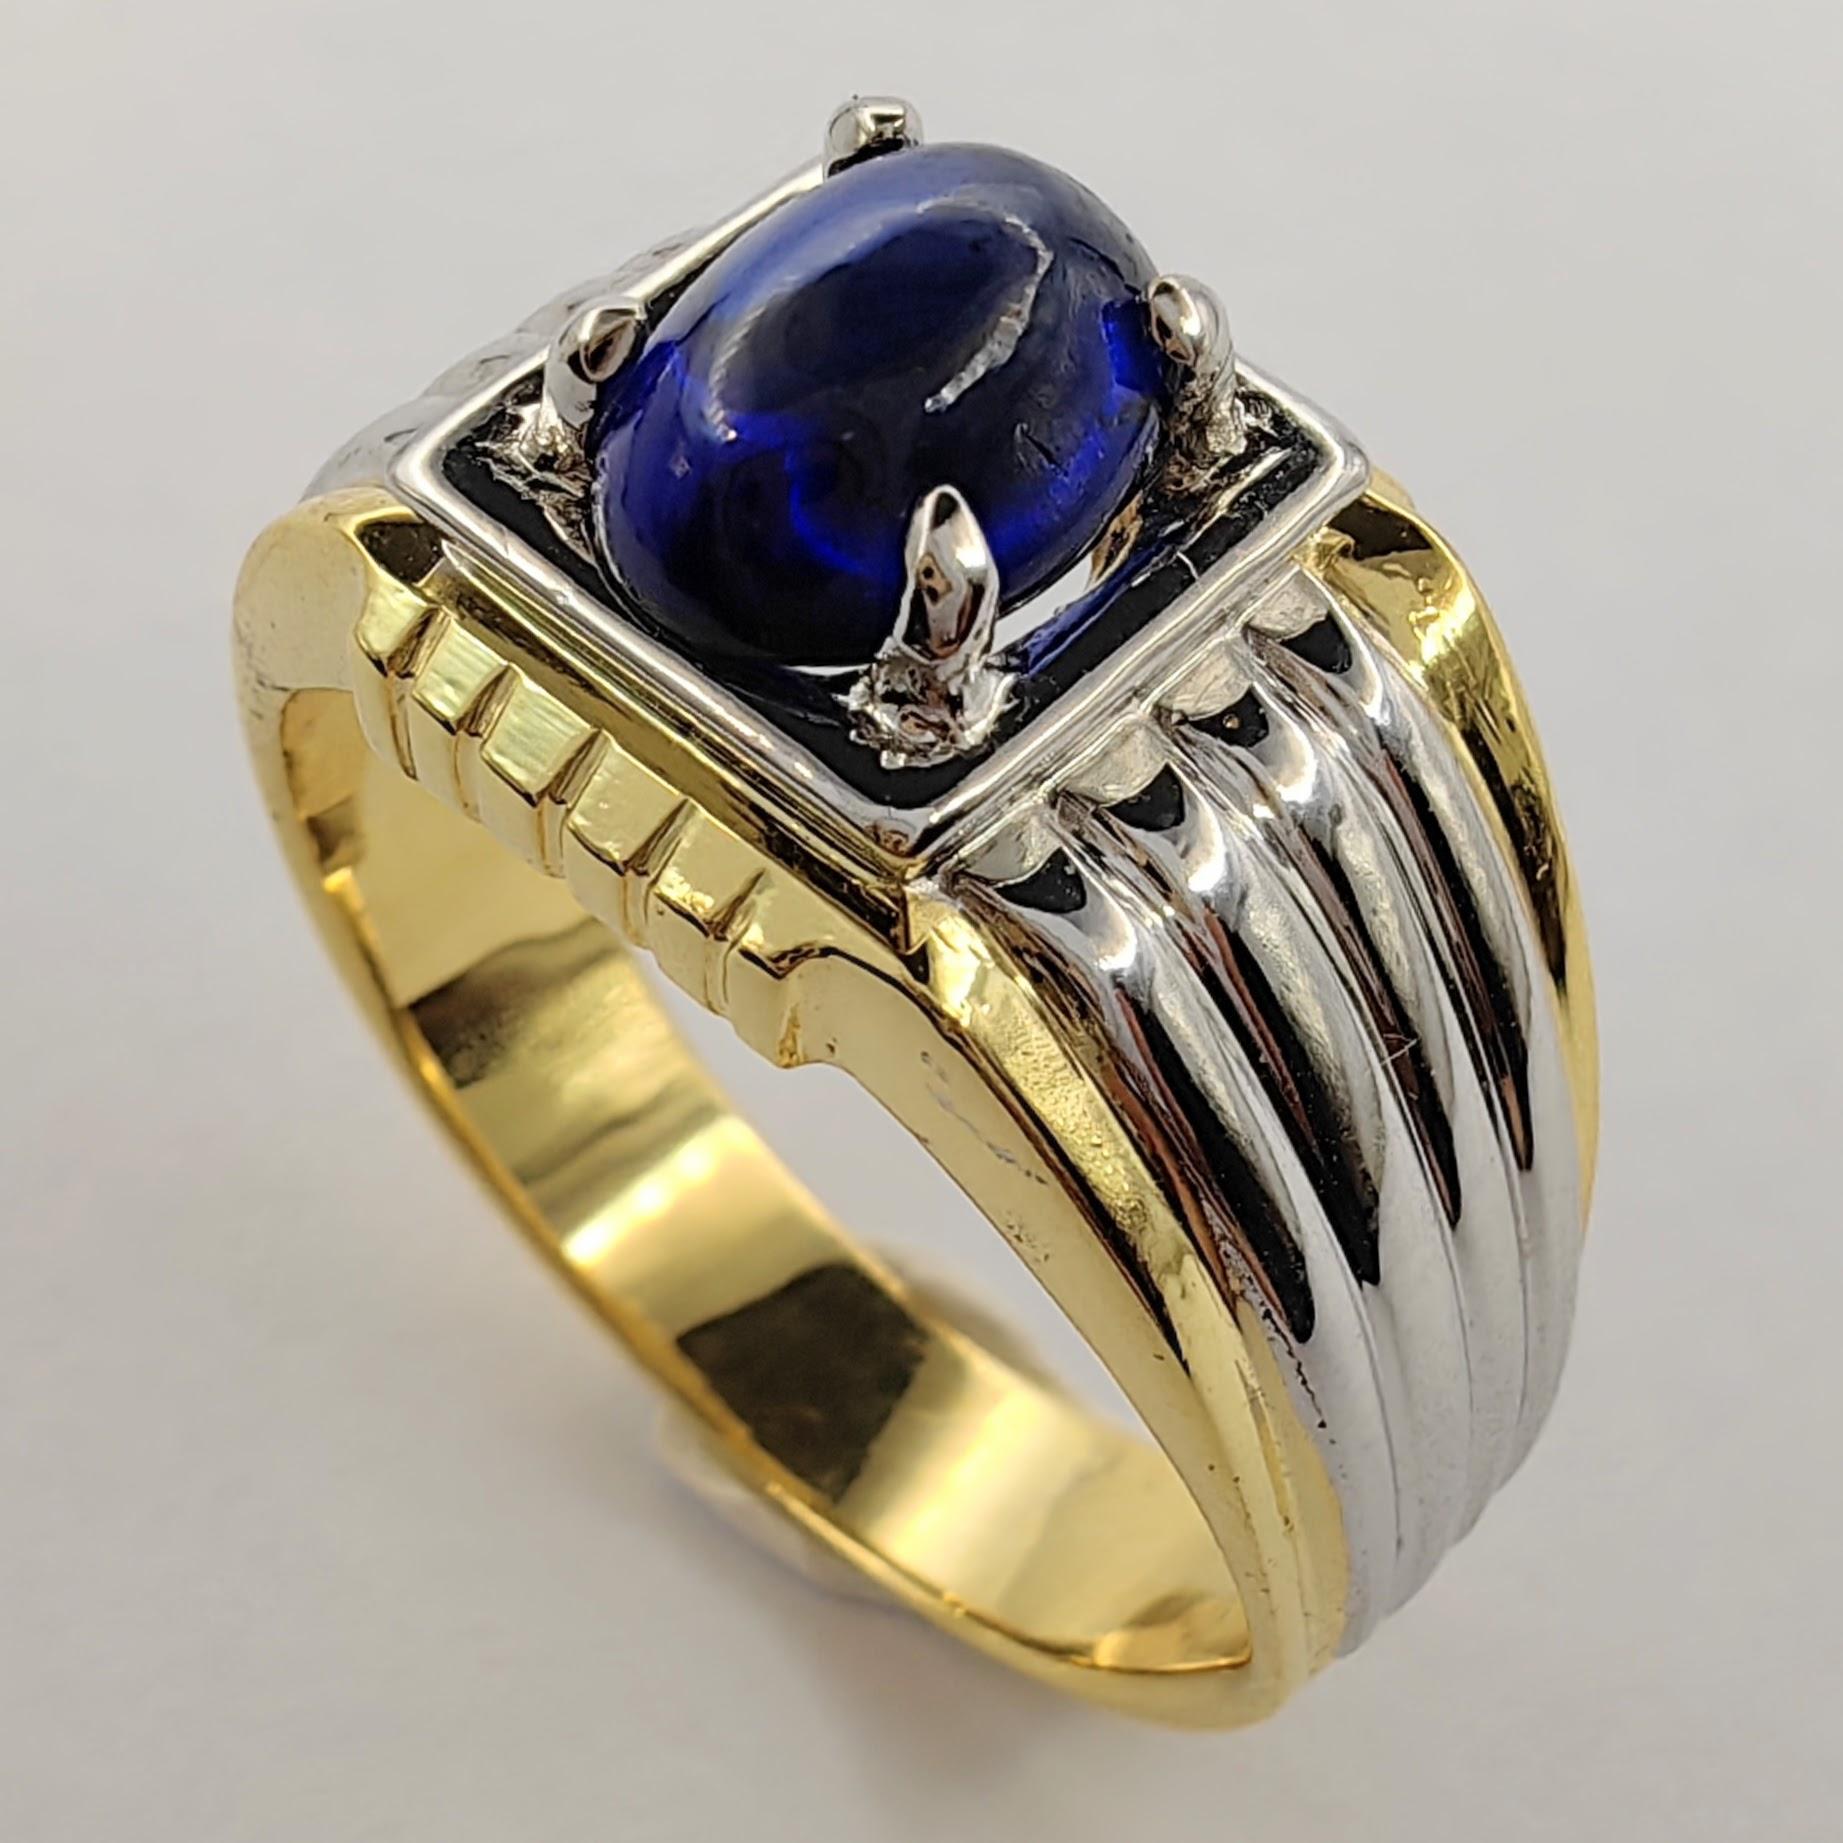 Introducing our Vintage 80's 1.66 Carat Cabochon Sapphire Two-Tone Men's Ring in 18K Gold, a timeless piece that combines classic elegance with a touch of retro charm, enriched with exquisite details.

At the heart of this distinguished ring lies a